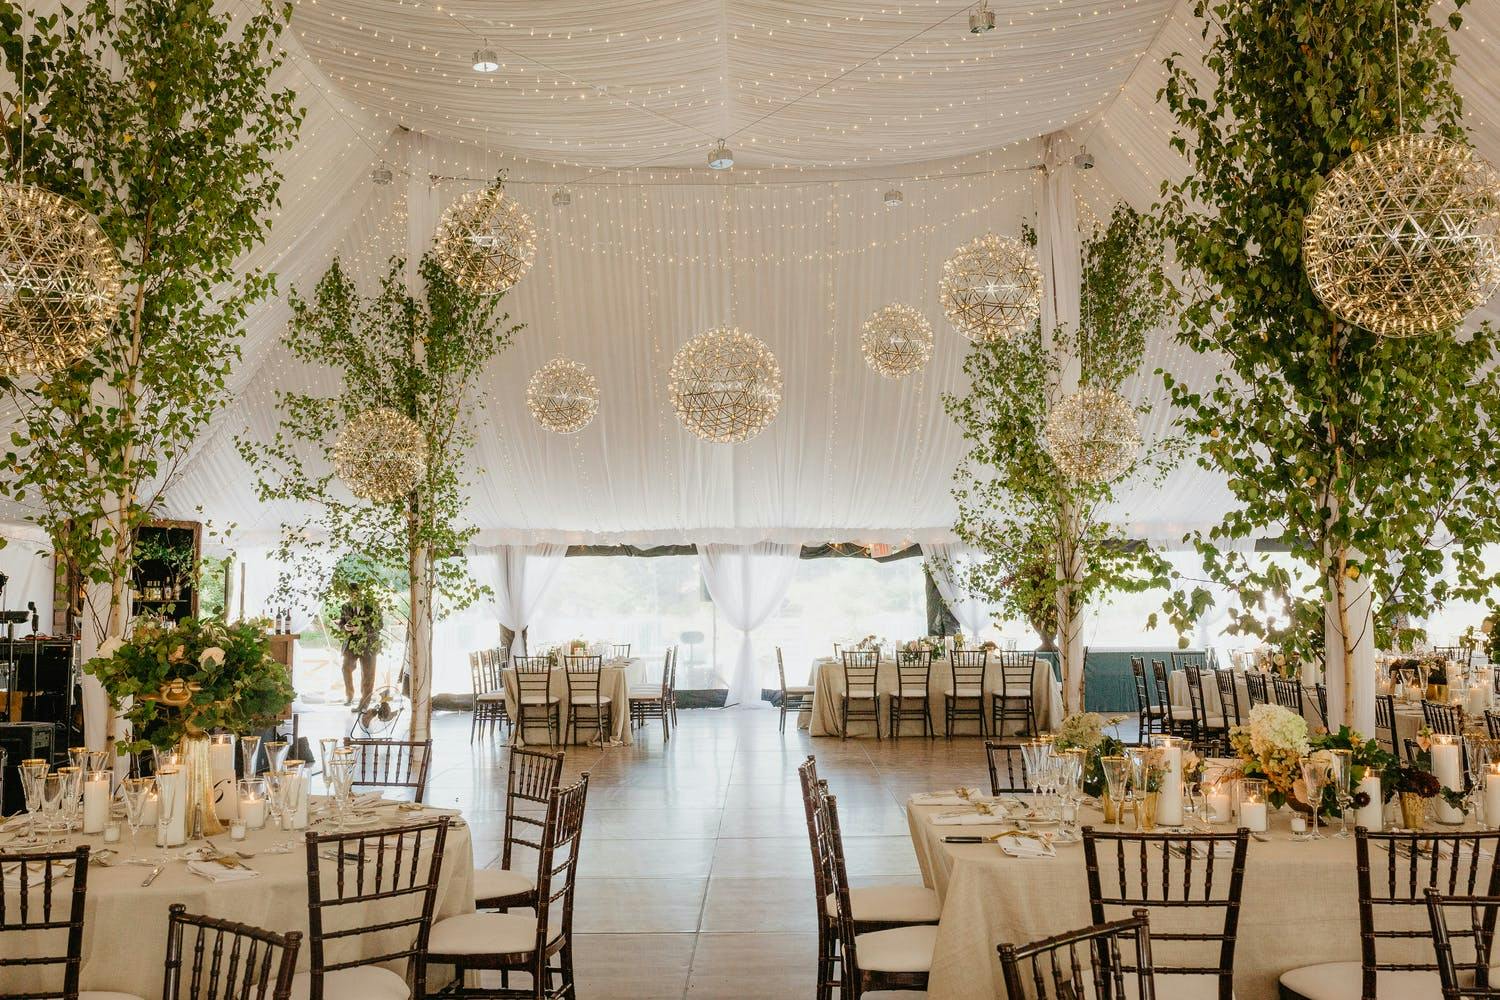 White tented wedding with towering tree décor and geometric chandeliers | PartySlate